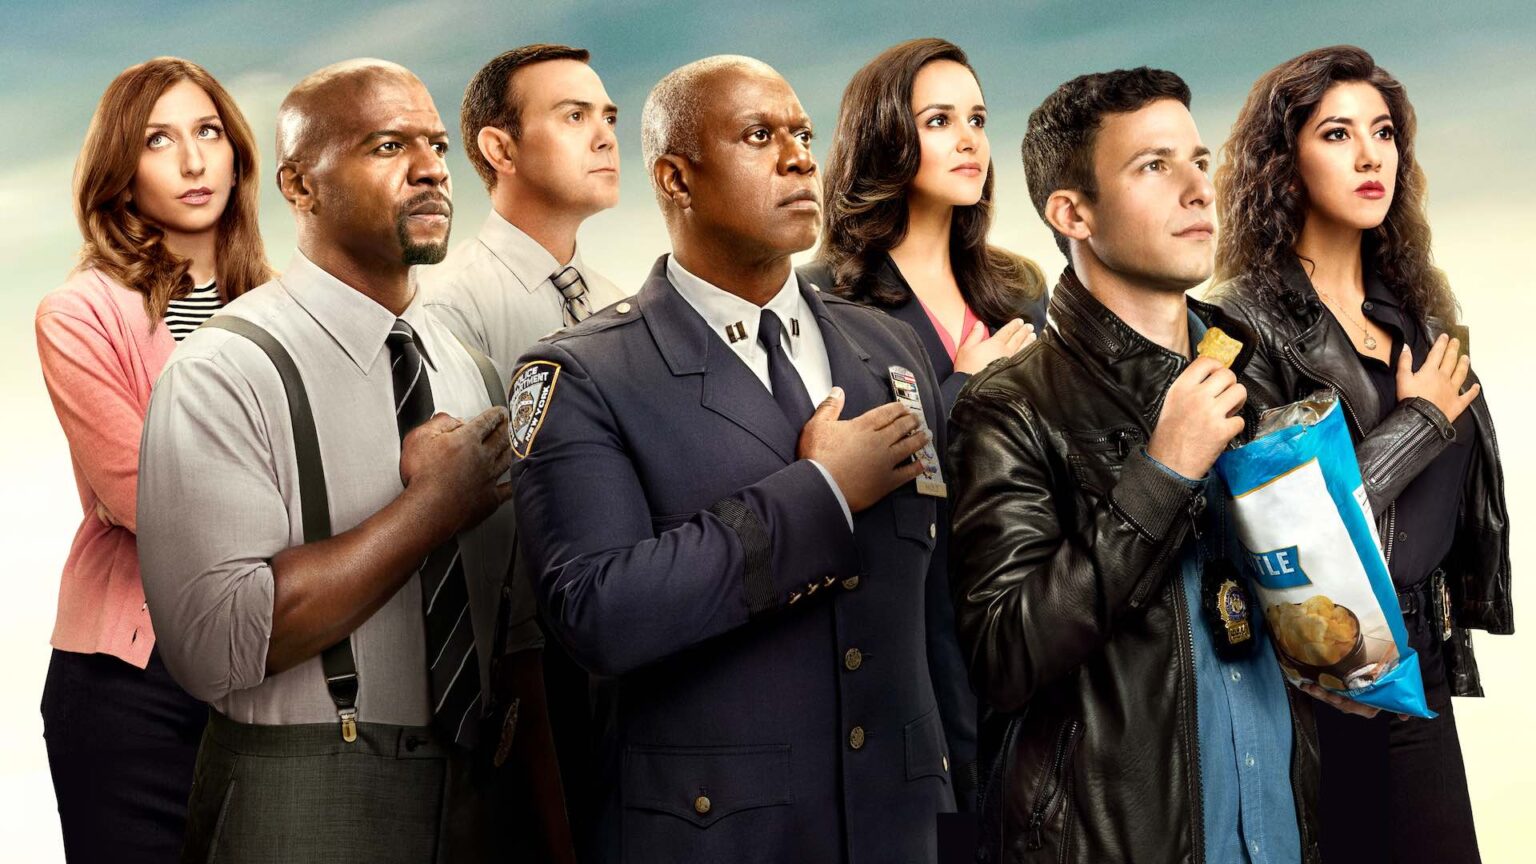 Wanna see something funny with a mysterious twist? If you liked 'Psych,' then you'll want to browse through our list of amusing detective TV shows!